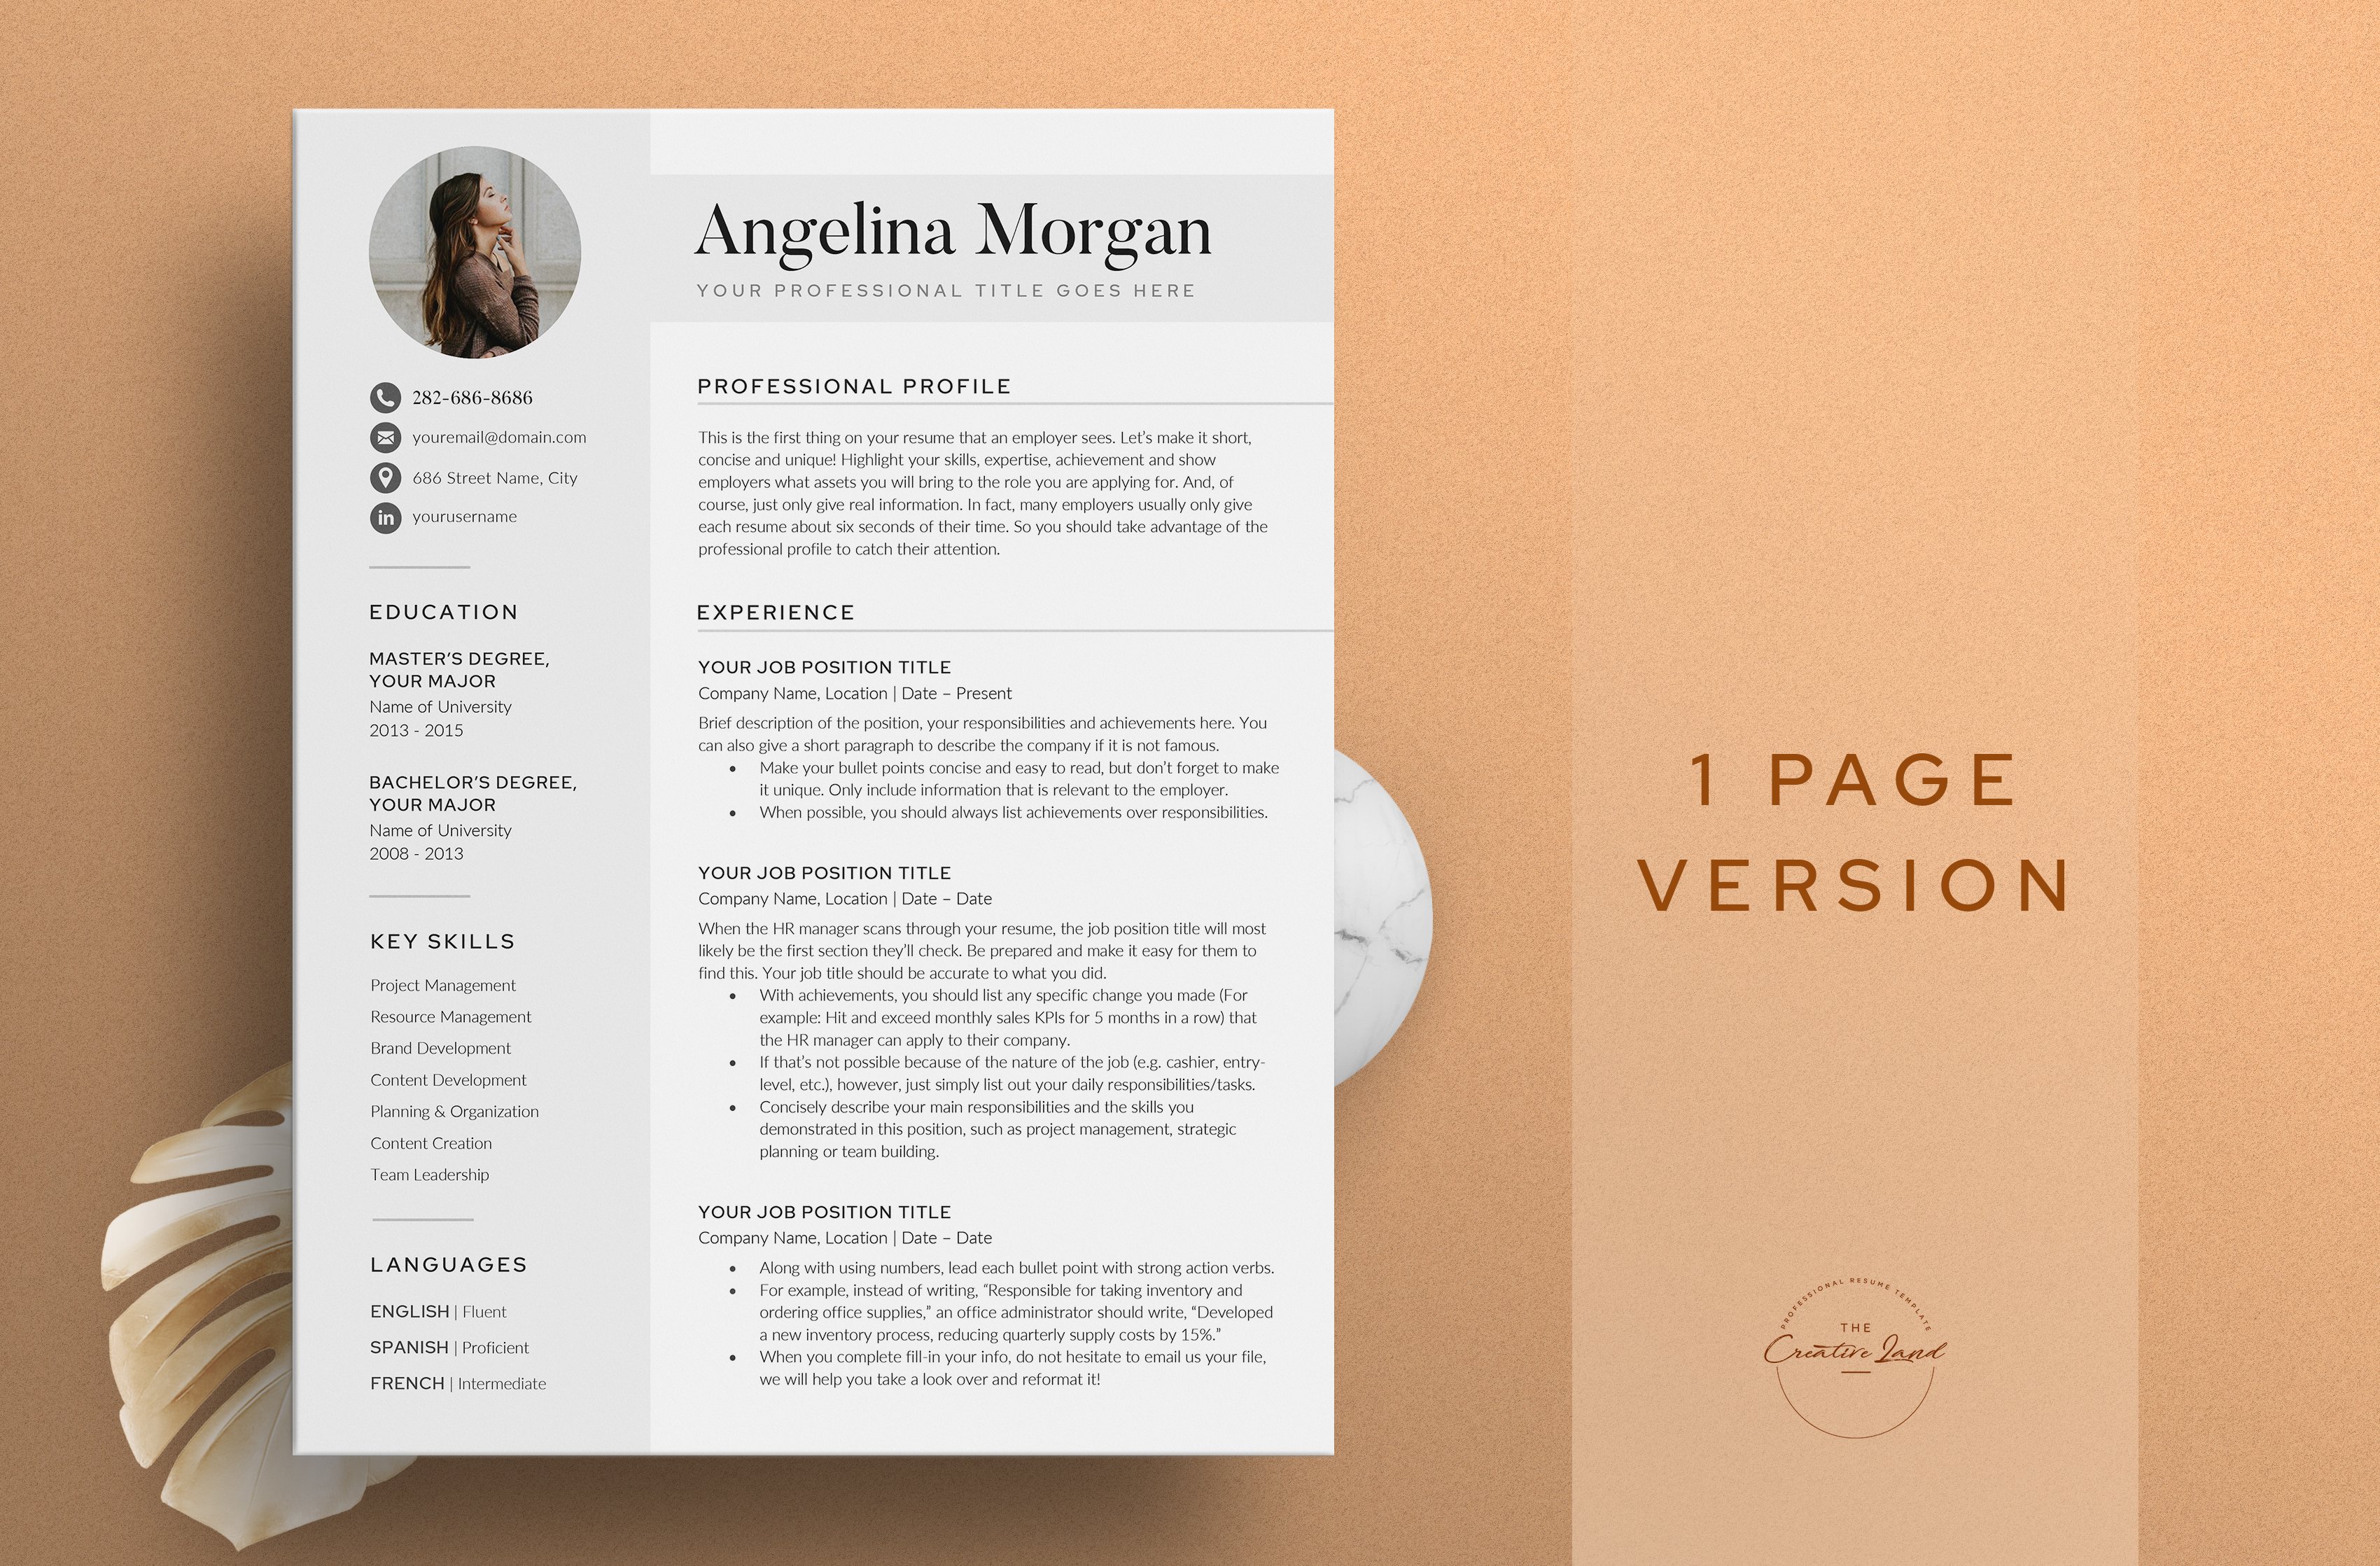 Resume/CV - The Angel preview image.